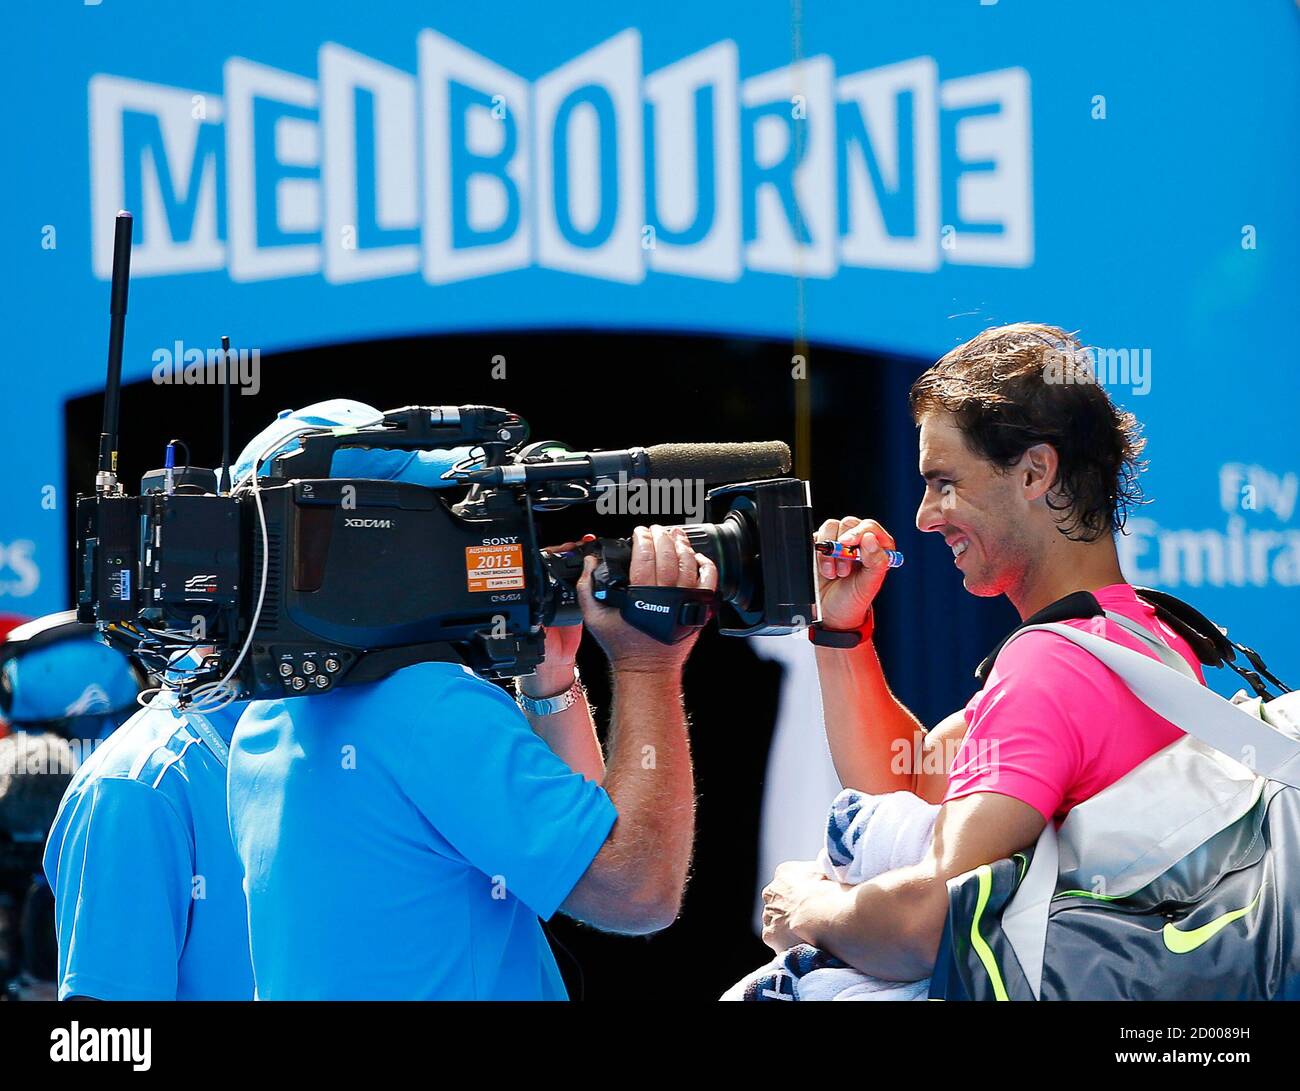 Urskive inden for obligat Rafael Nadal of Spain signs on the lens of a television camera after  defeating Mikhail Youzhny of Russia in their men's singles first round  match at the Australian Open 2015 tennis tournament